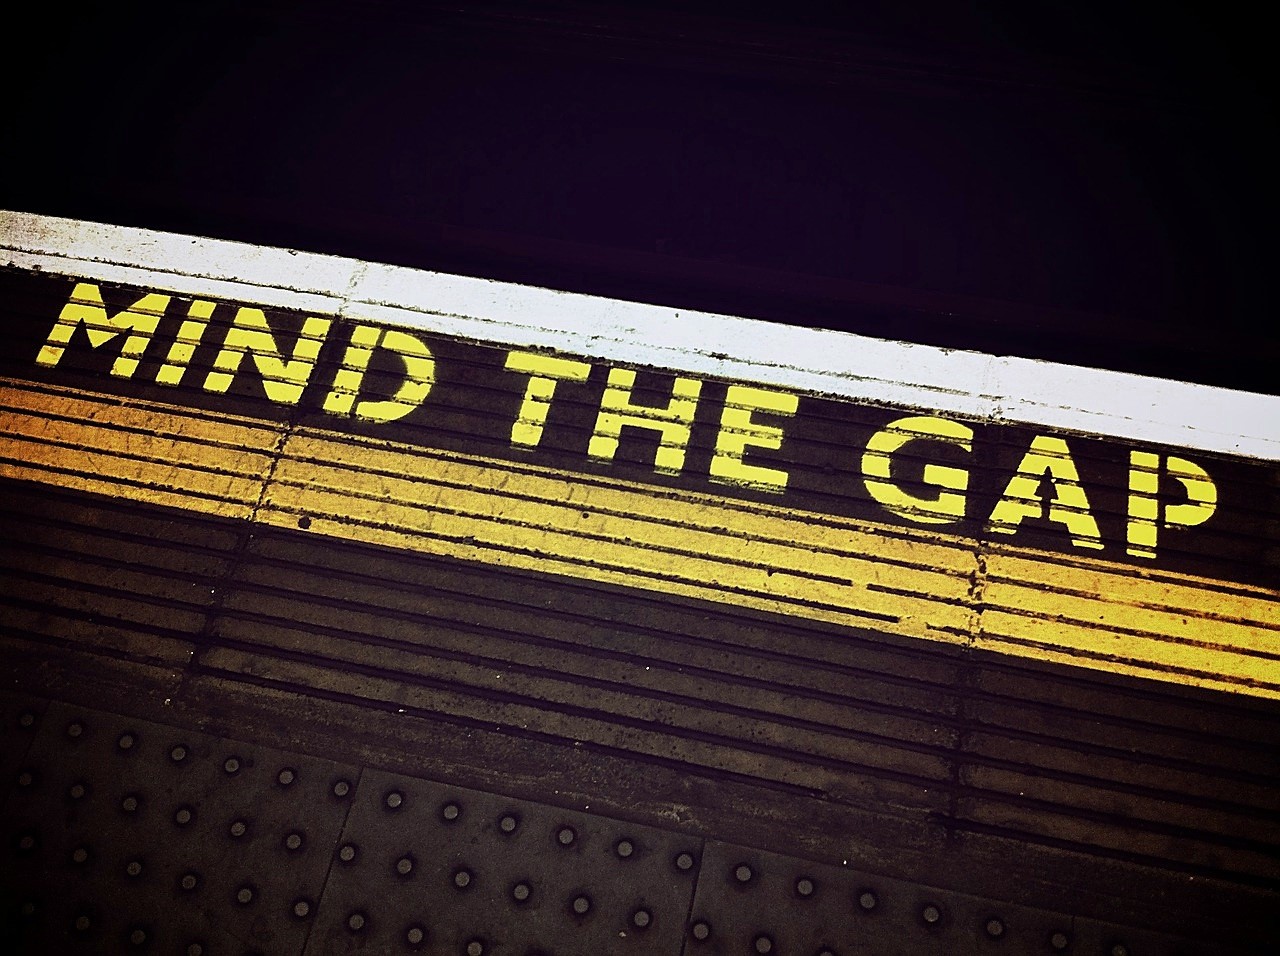 Mind the Gap sign from a subway platform